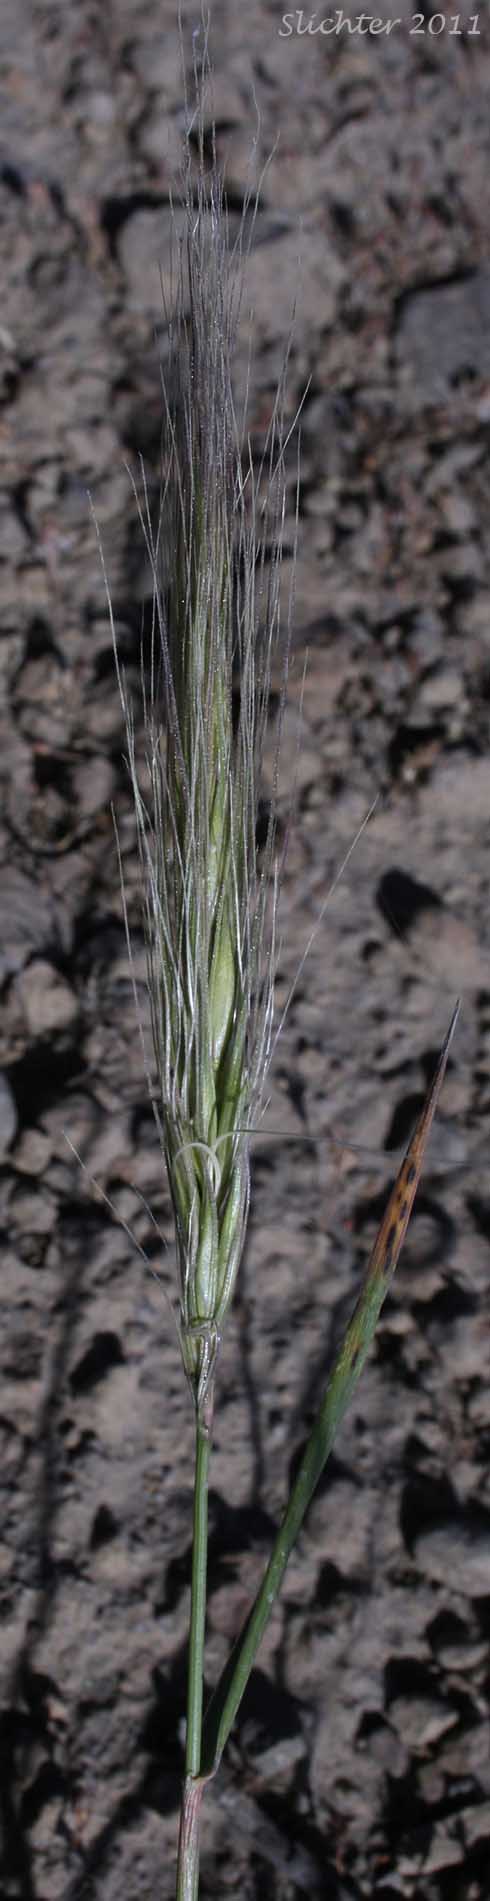 Close-up of the inflorescence of Squirreltail Grass, Bottlebrush Squirreltail: Elymus elymoides (Synonym: Sitanion hystrix)